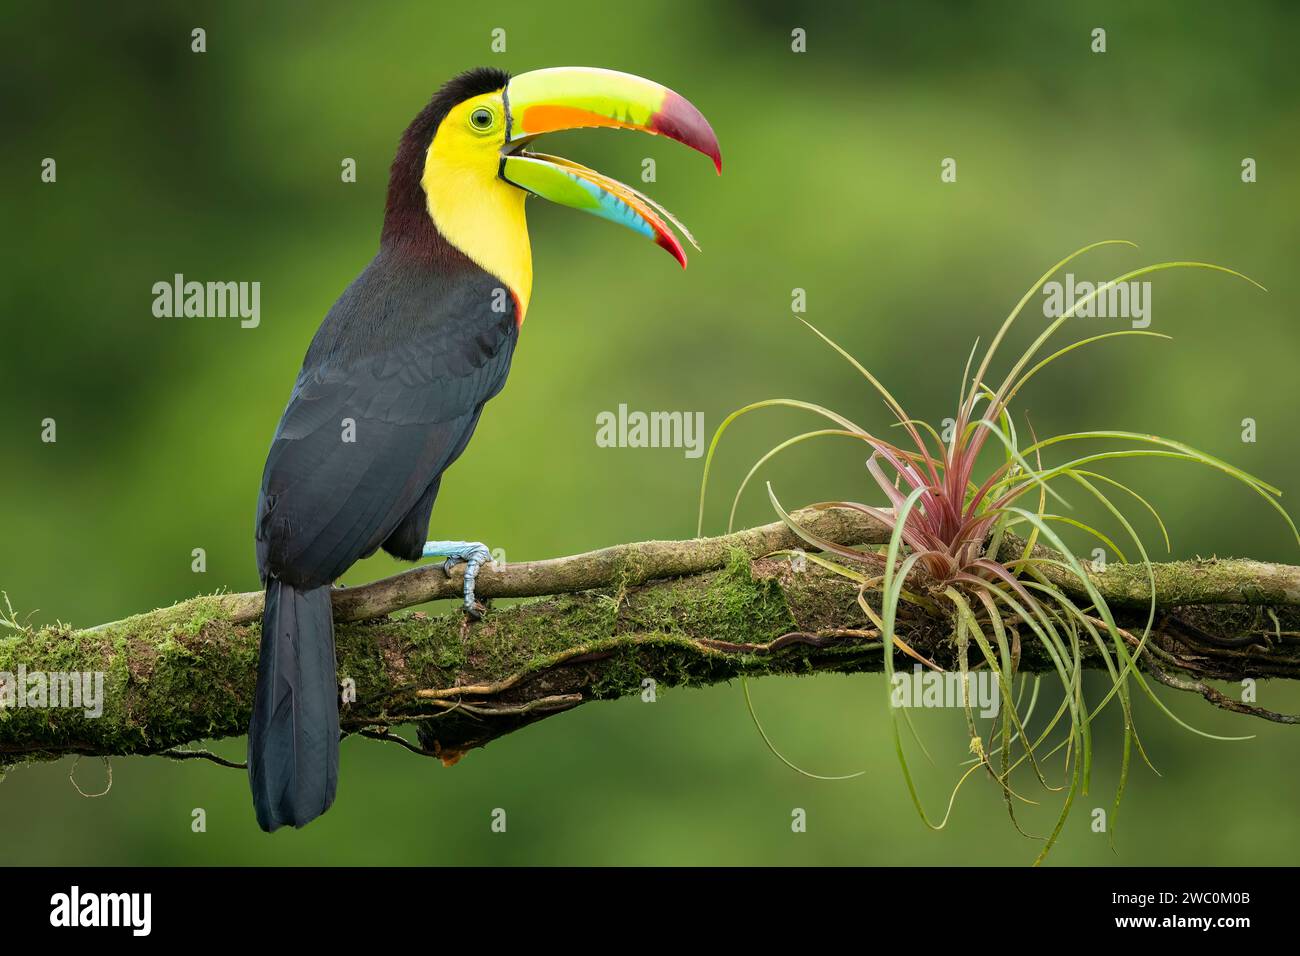 Keel-billed Toucan, Ramphastos sulfuratus, sitting on the branch with beak wide open in Boca Tapada, Costa Rica. Nature travel in central America Stock Photo